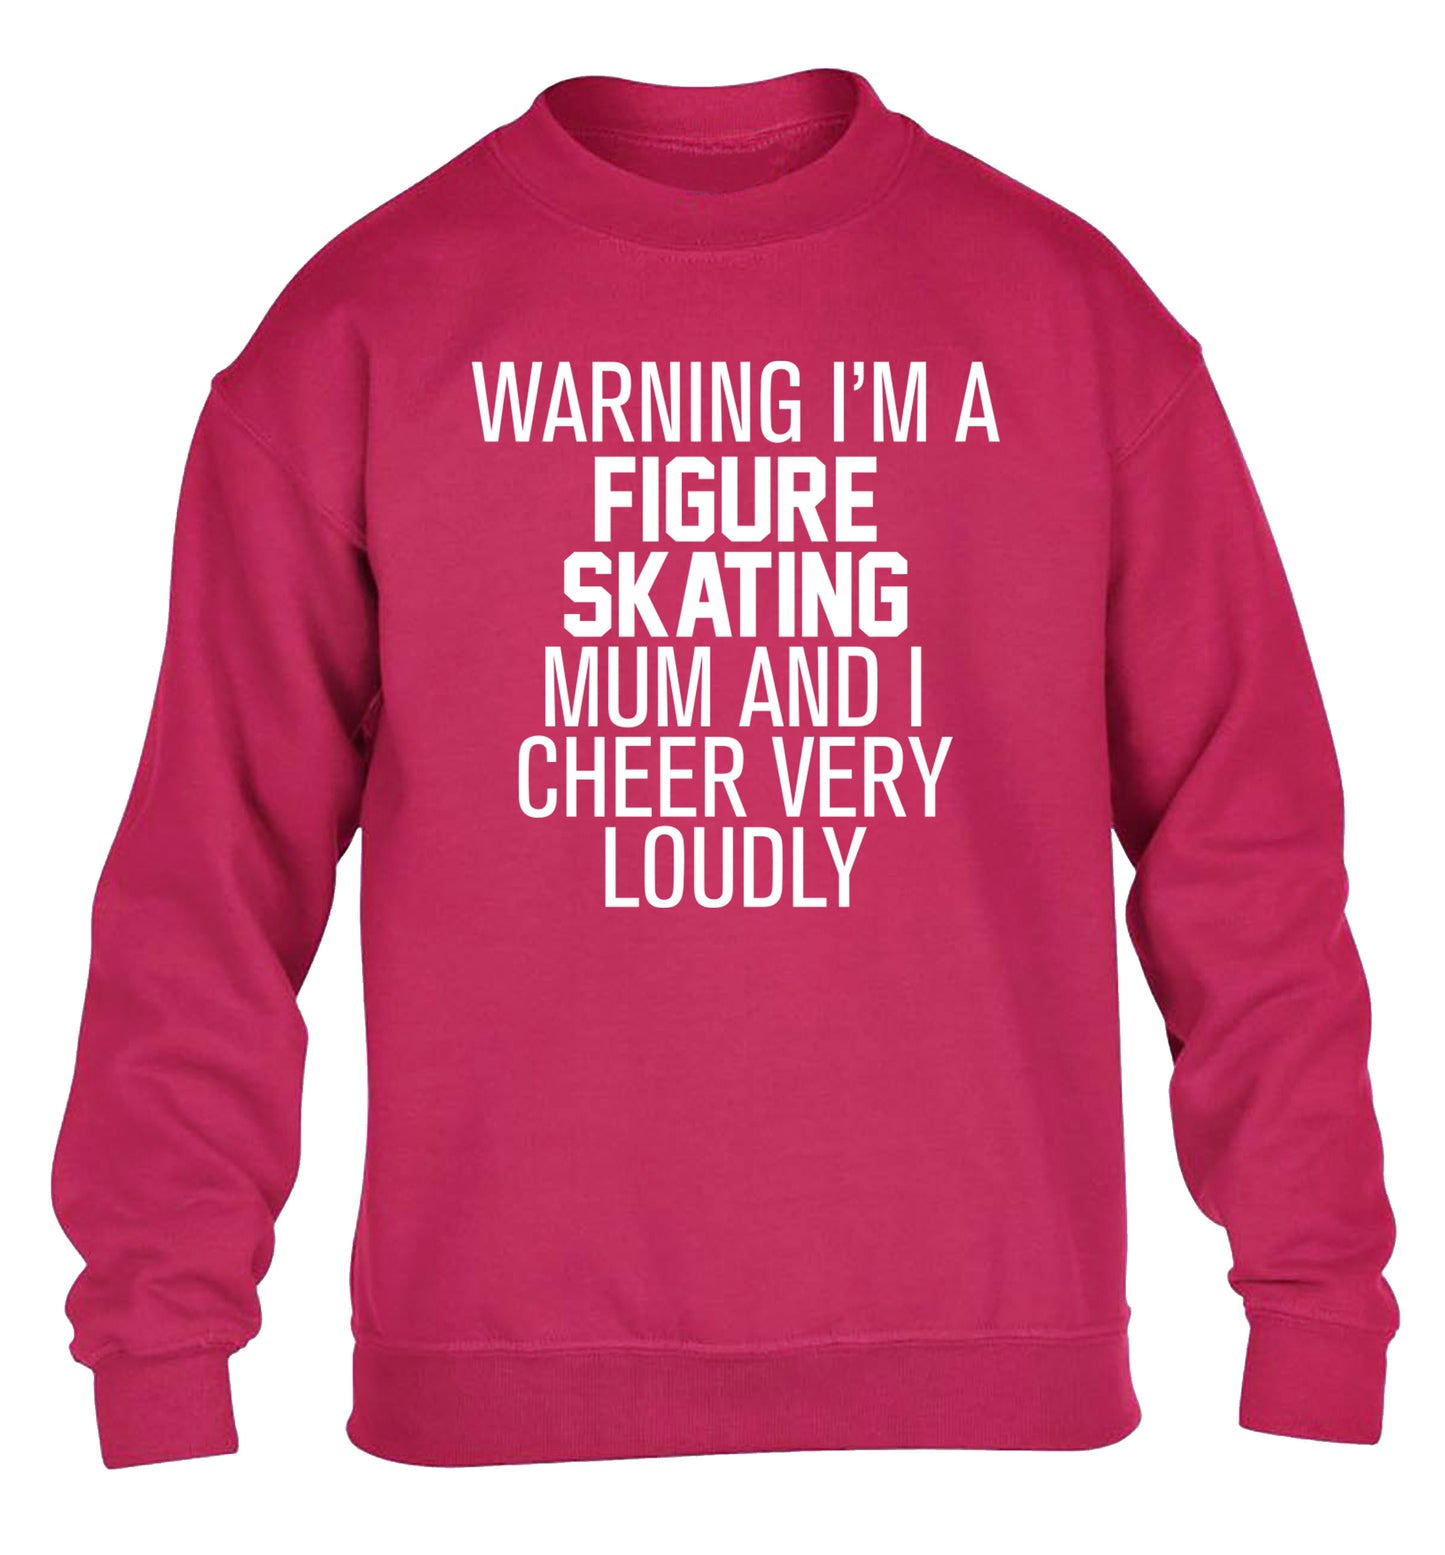 Warning I'm a figure skating mum and I cheer very loudly children's pink sweater 12-14 Years